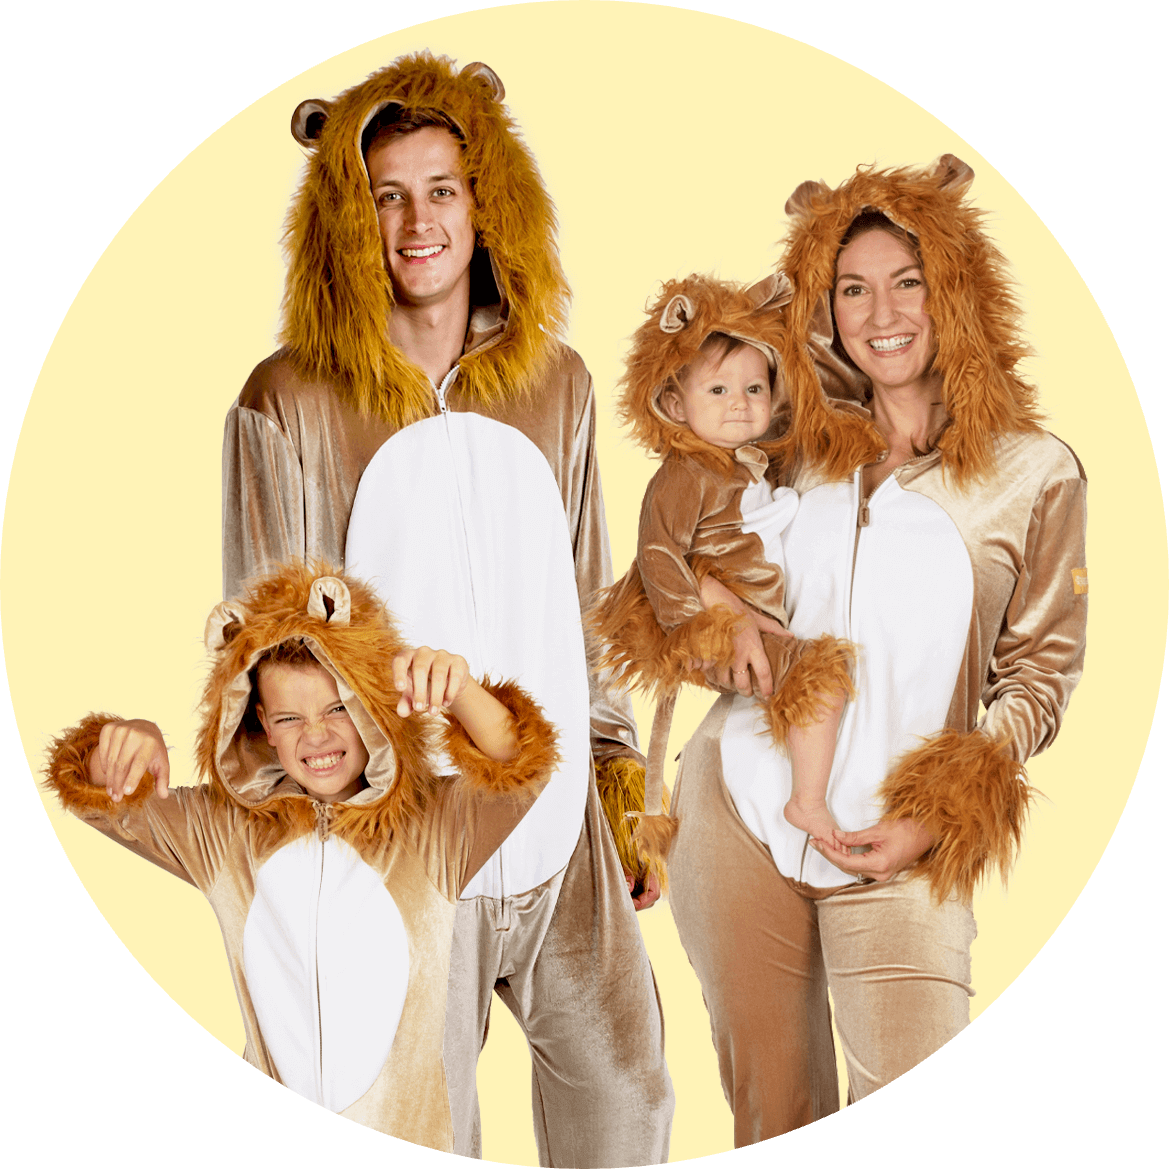 shop family costumes - image of family wearing lion costumes